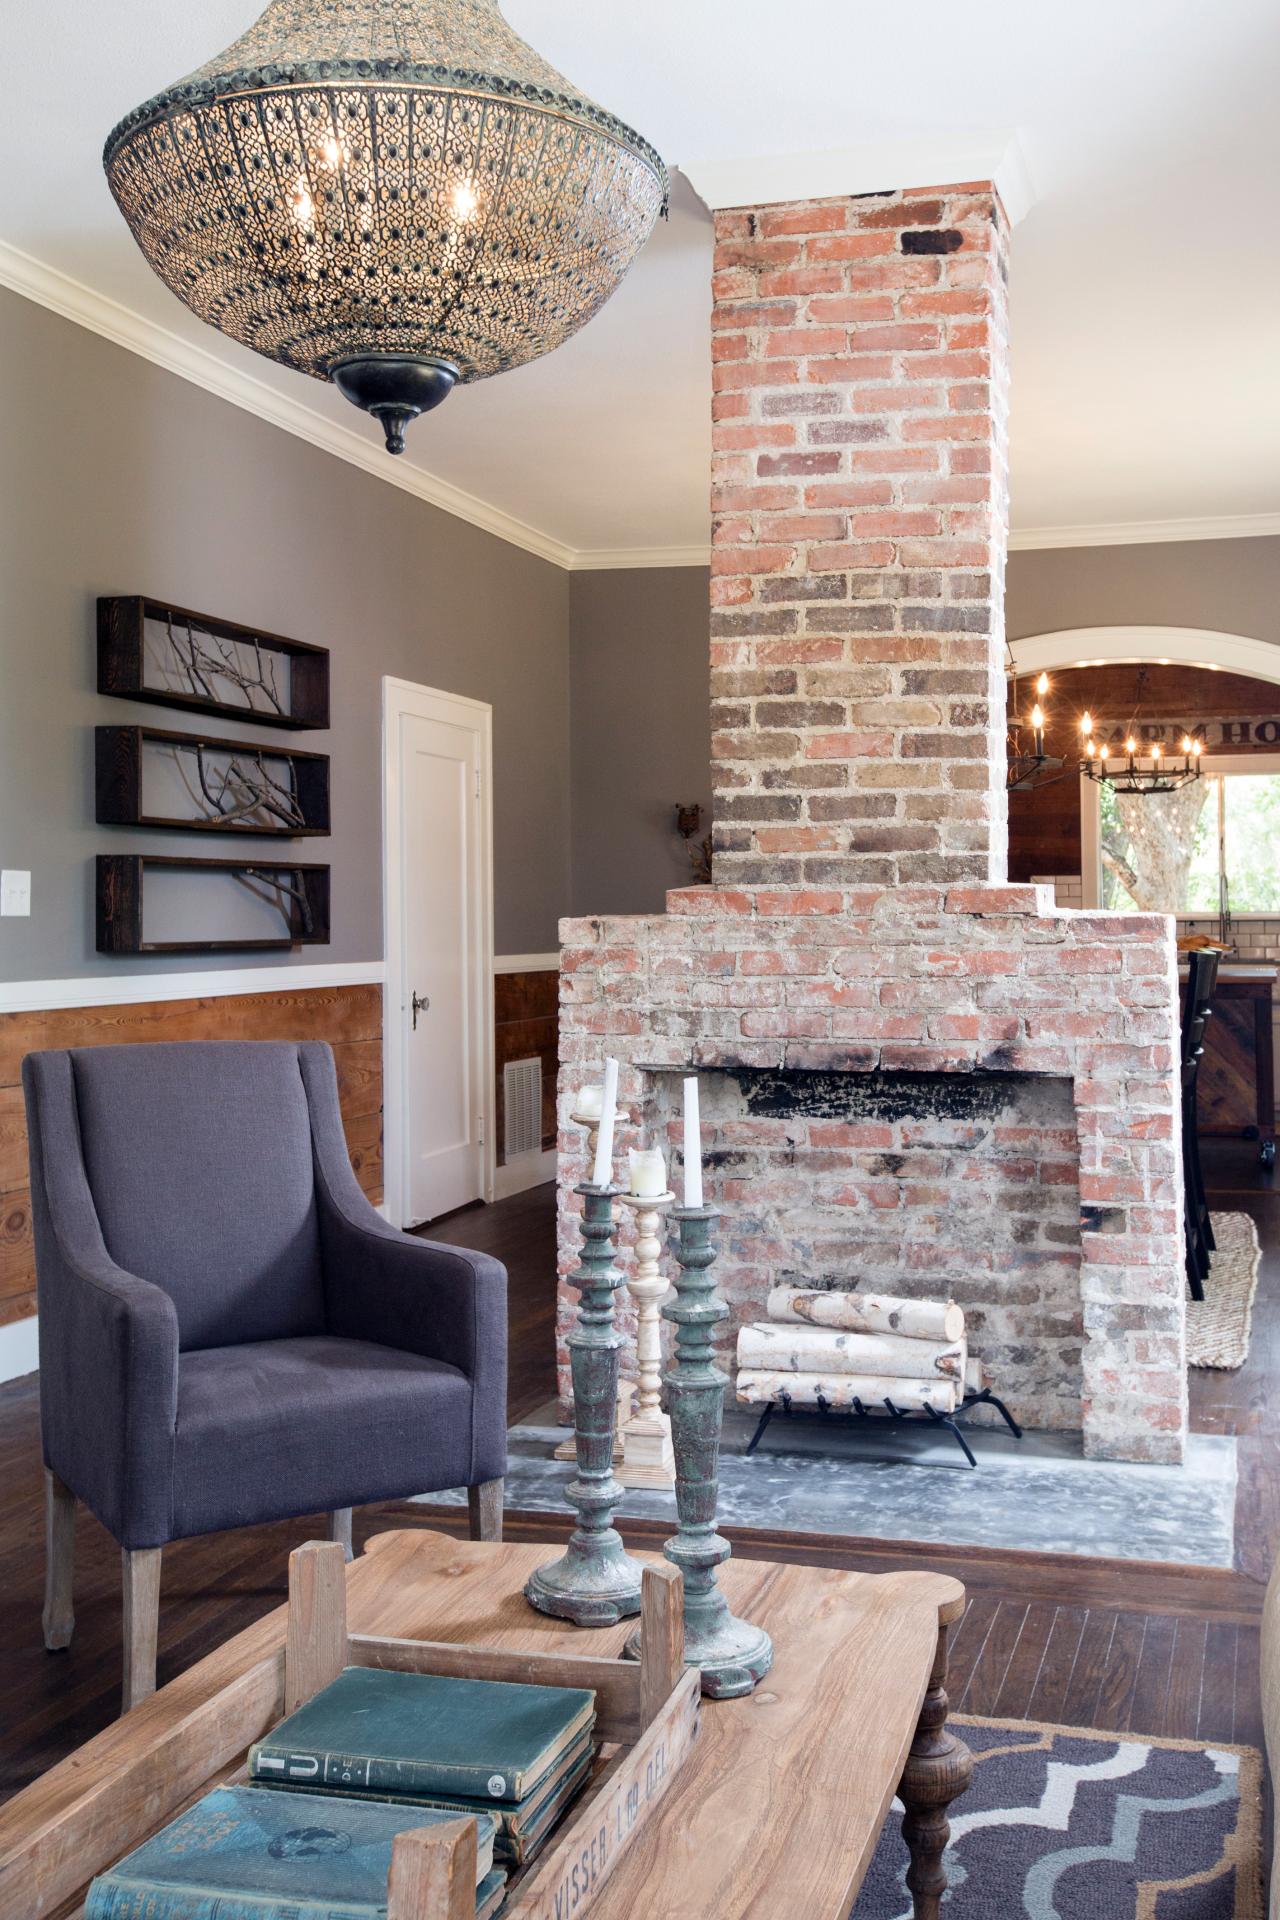 20+ Fabulous Fireplace Design Ideas for Any Budget or Style   HGTV